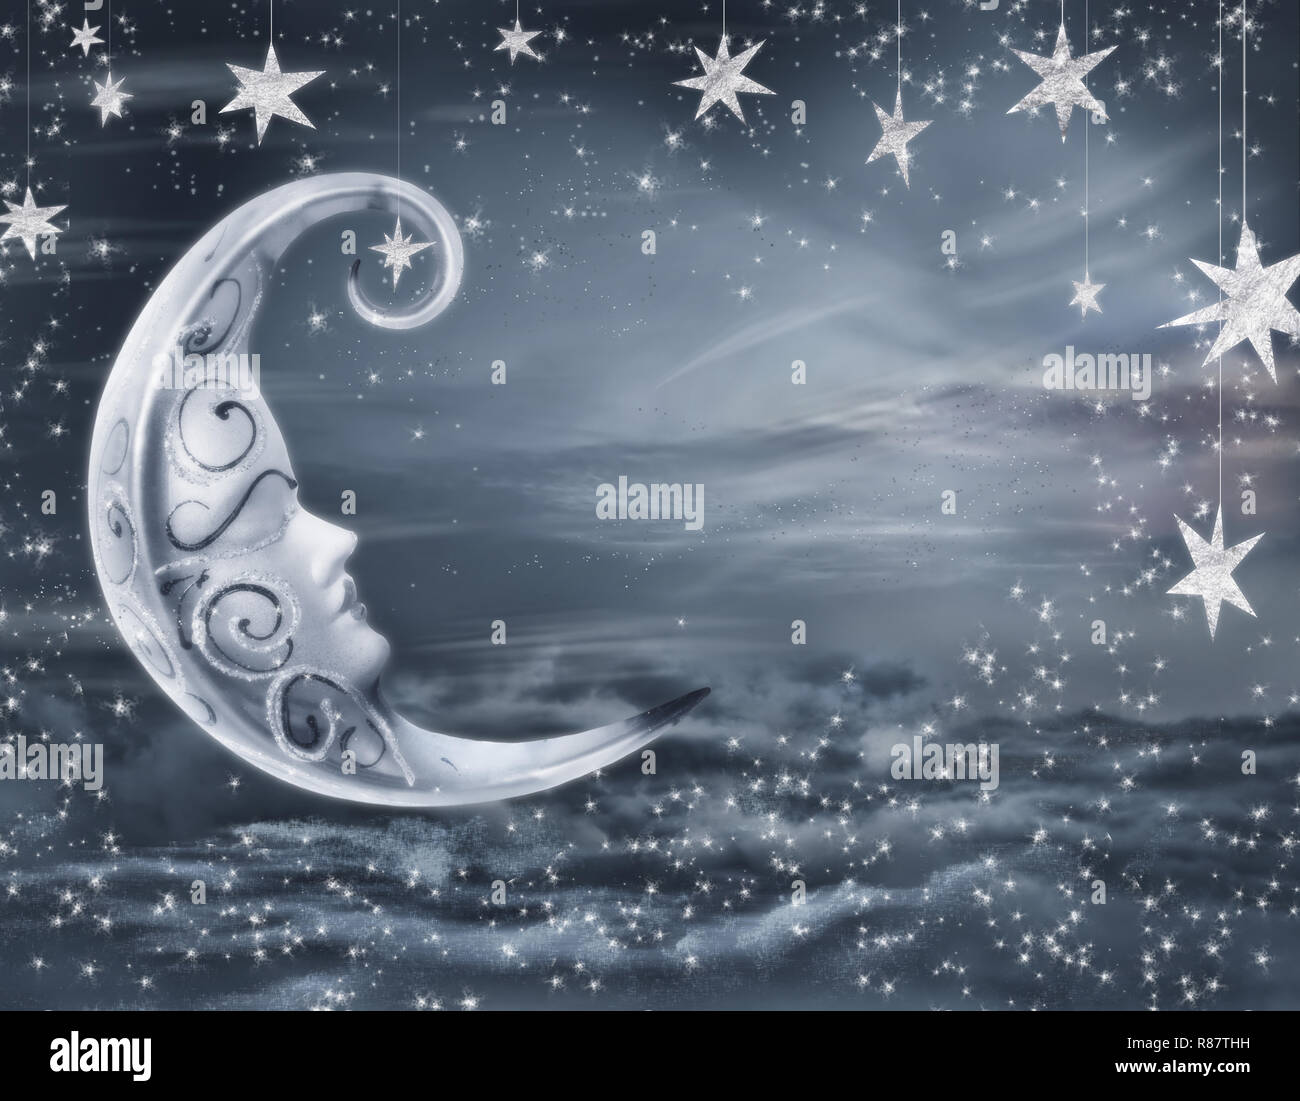 empty surreal fairy tale art background, night sky with moon face and stars, copy space for text Stock Photo